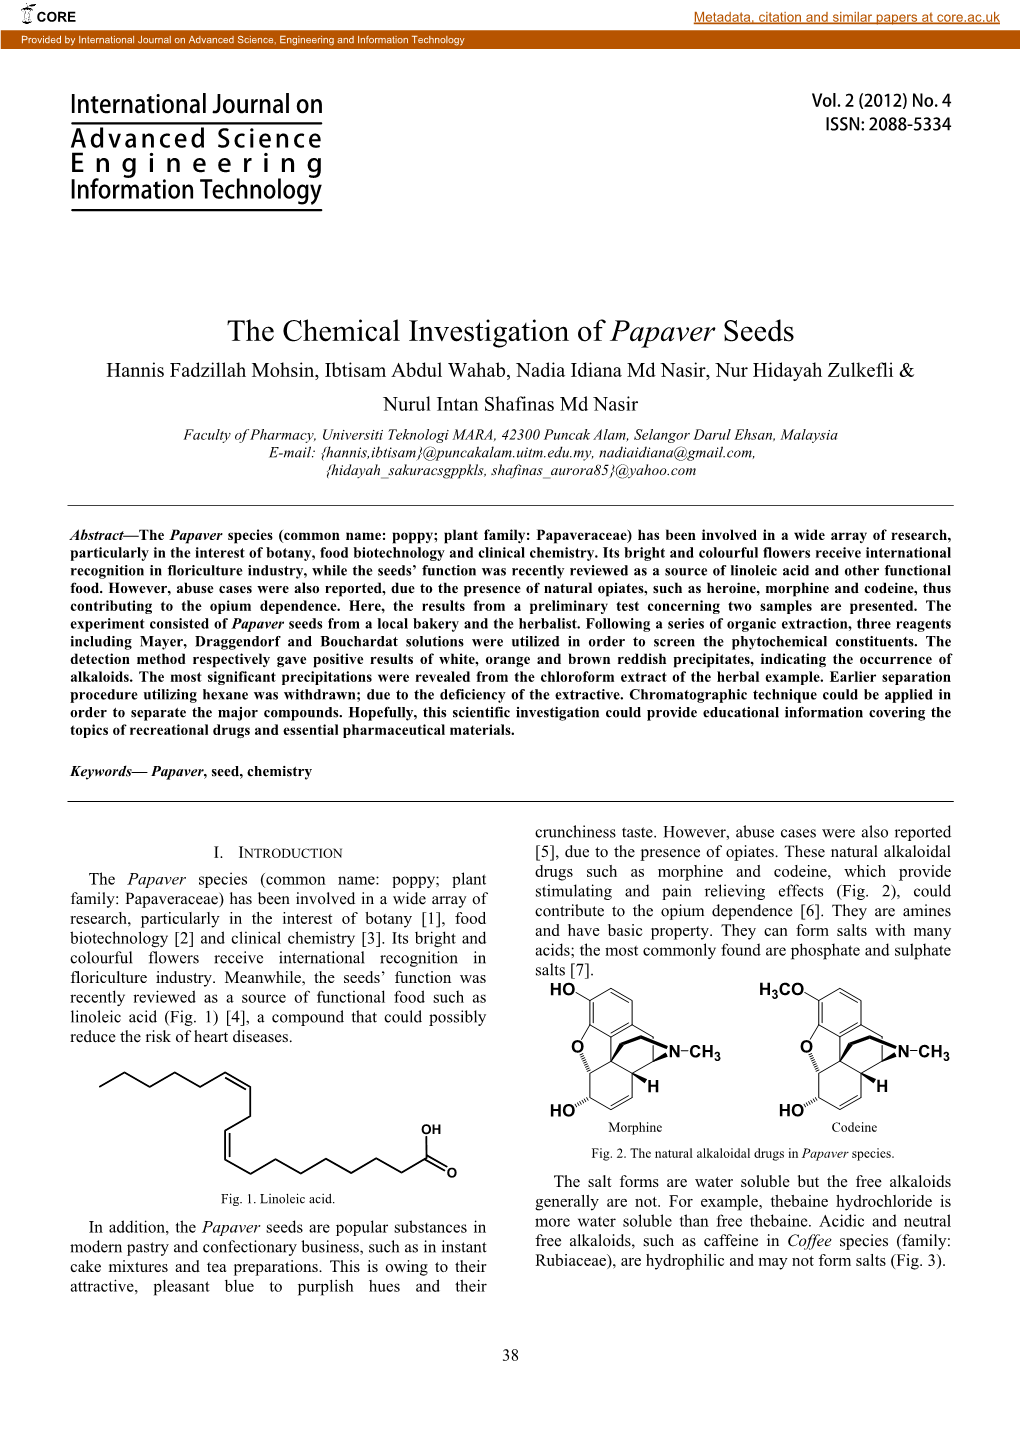 The Chemical Investigation of Papaver Seeds